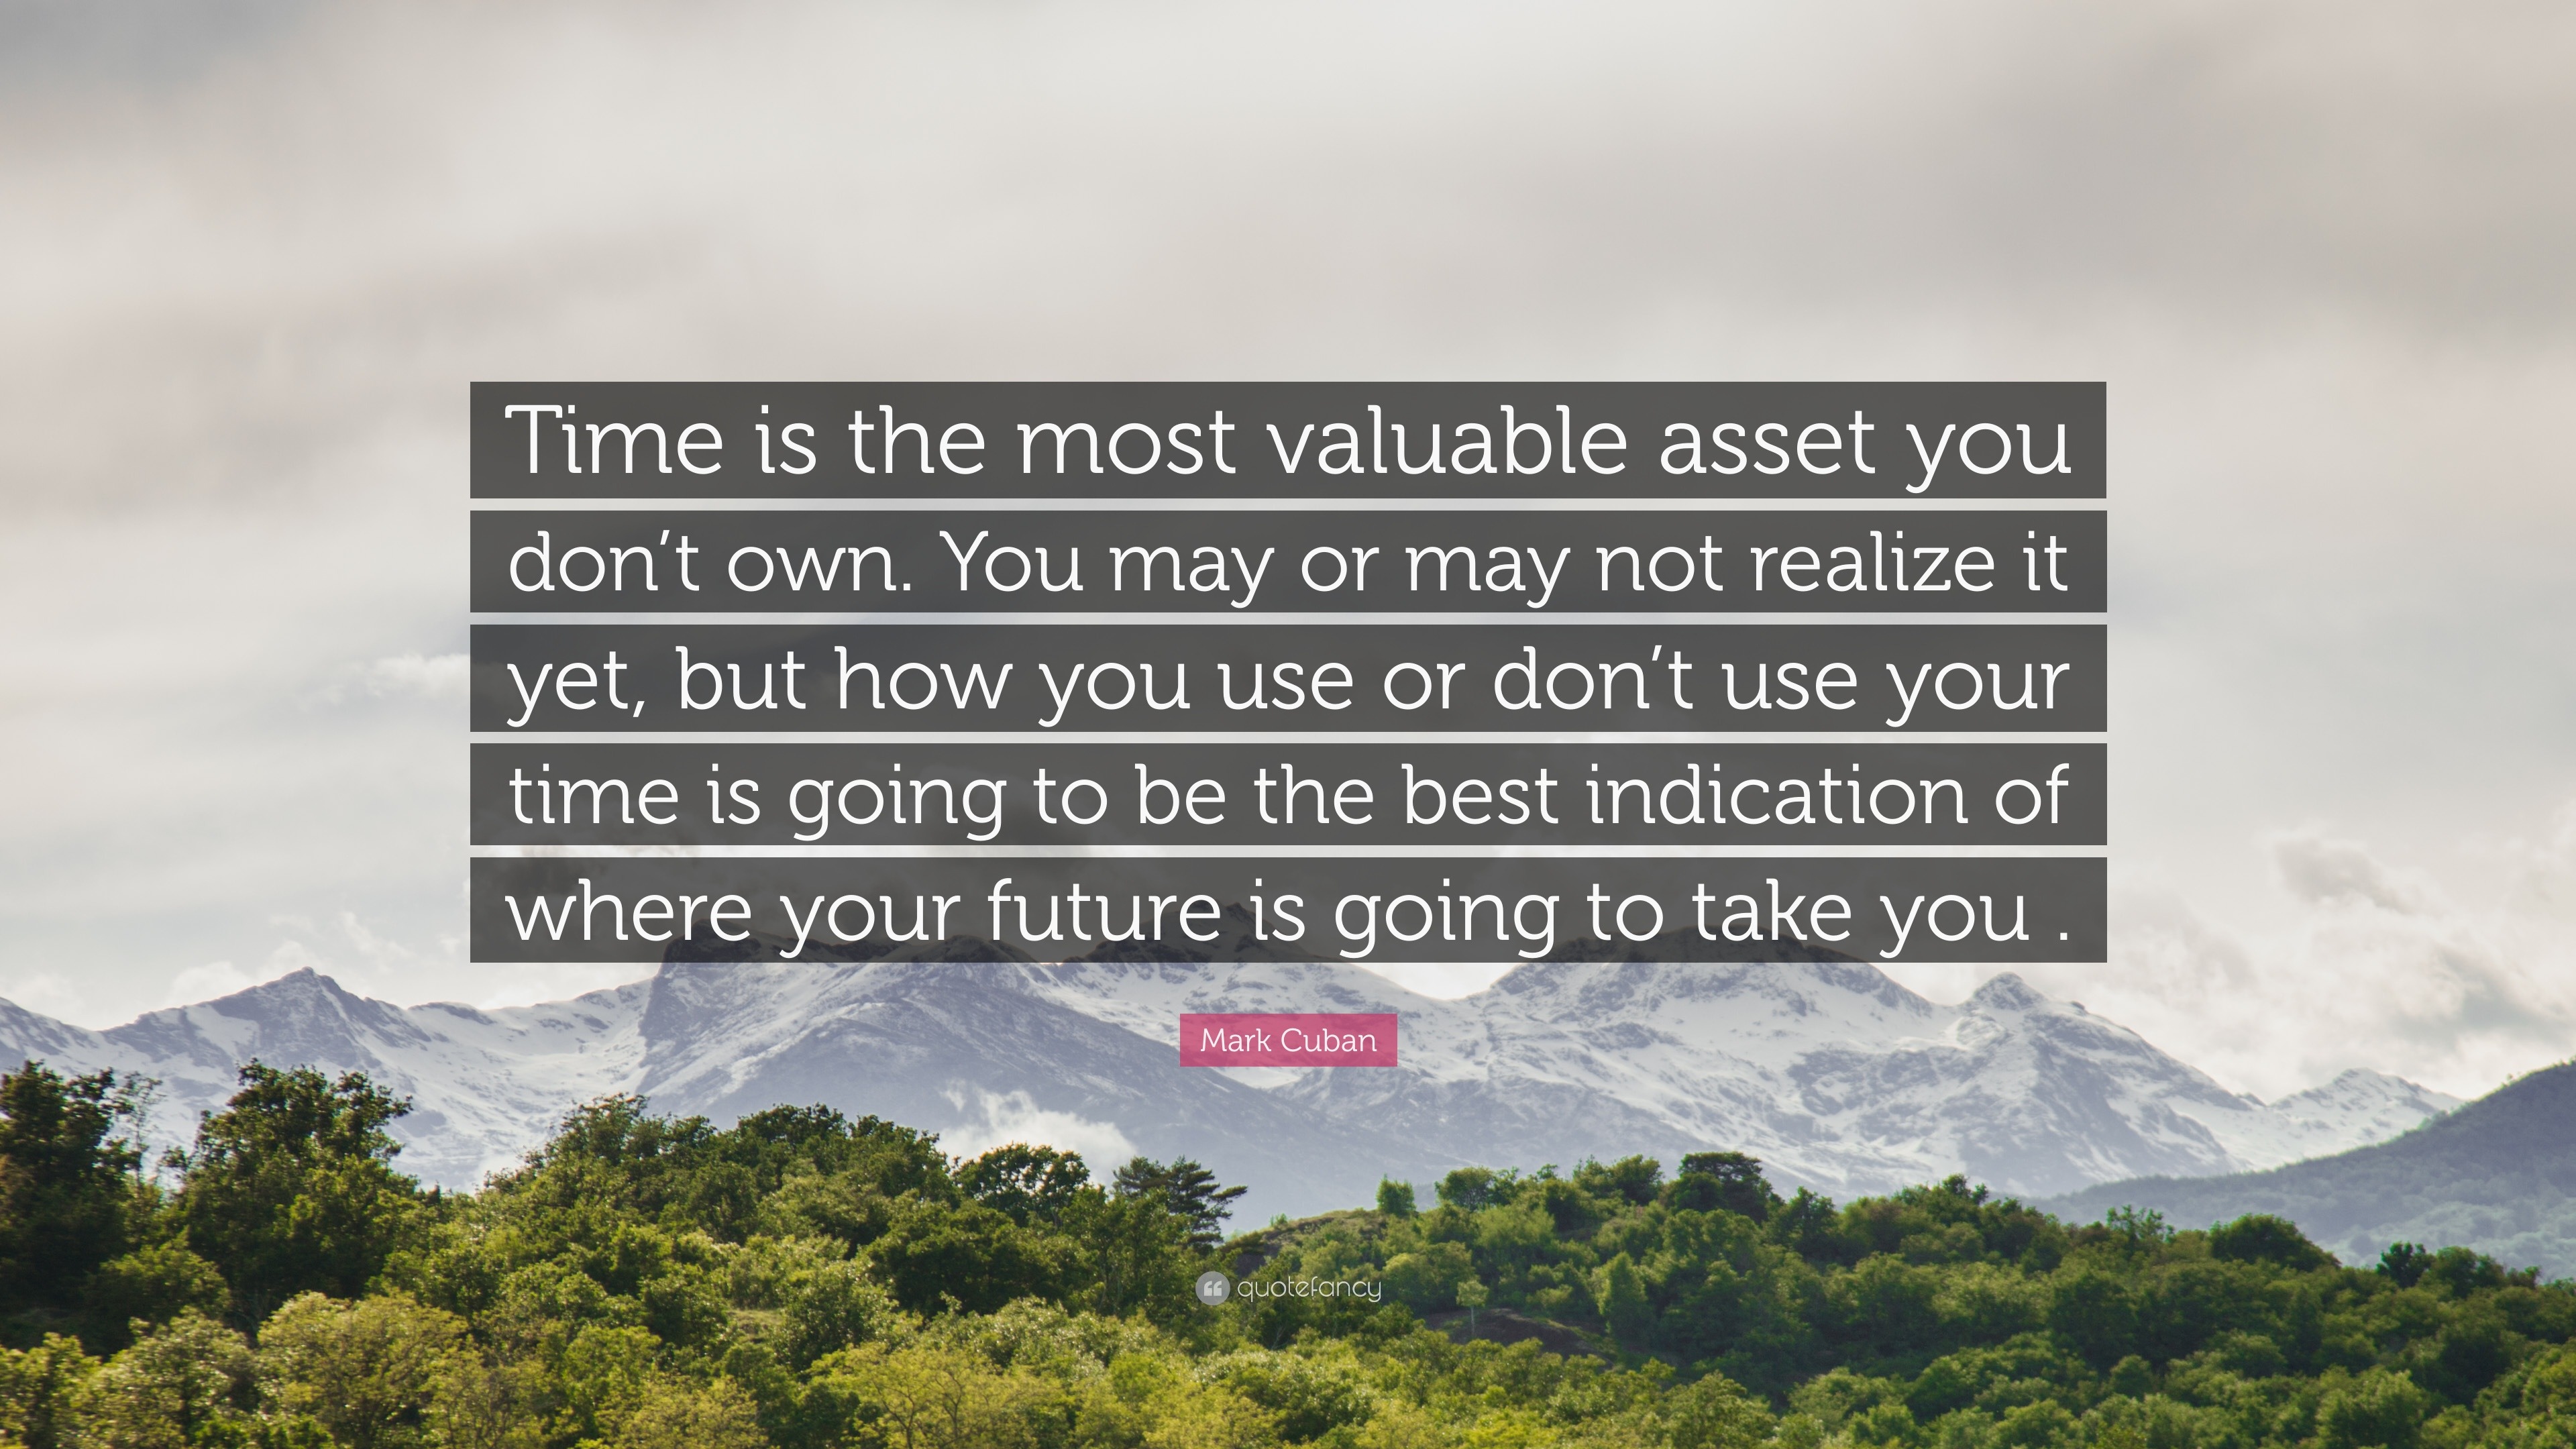 Mark Cuban Quote: “Time is the most valuable asset you don't own. You may  or may not realize it yet, but how you use or don't use your time”